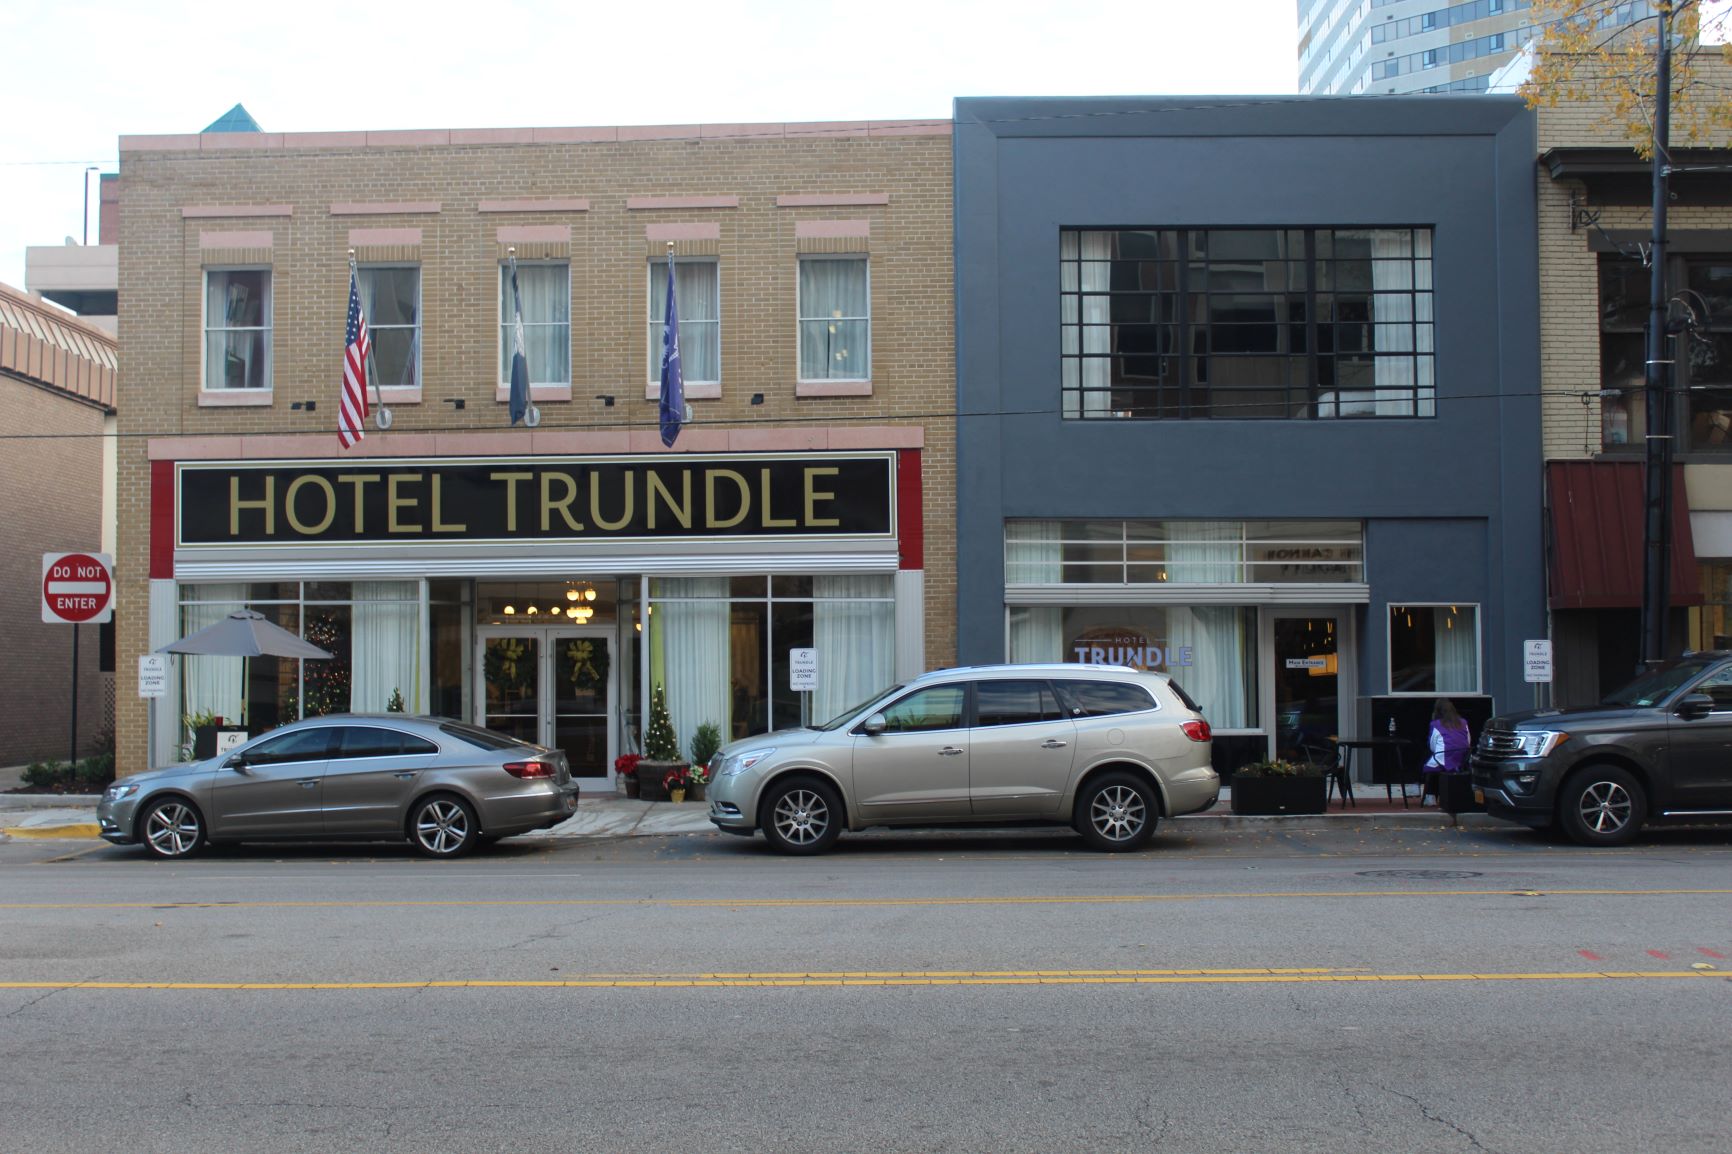 Hotel Trundle and BOUDREAUX design firm in downtown Columbia